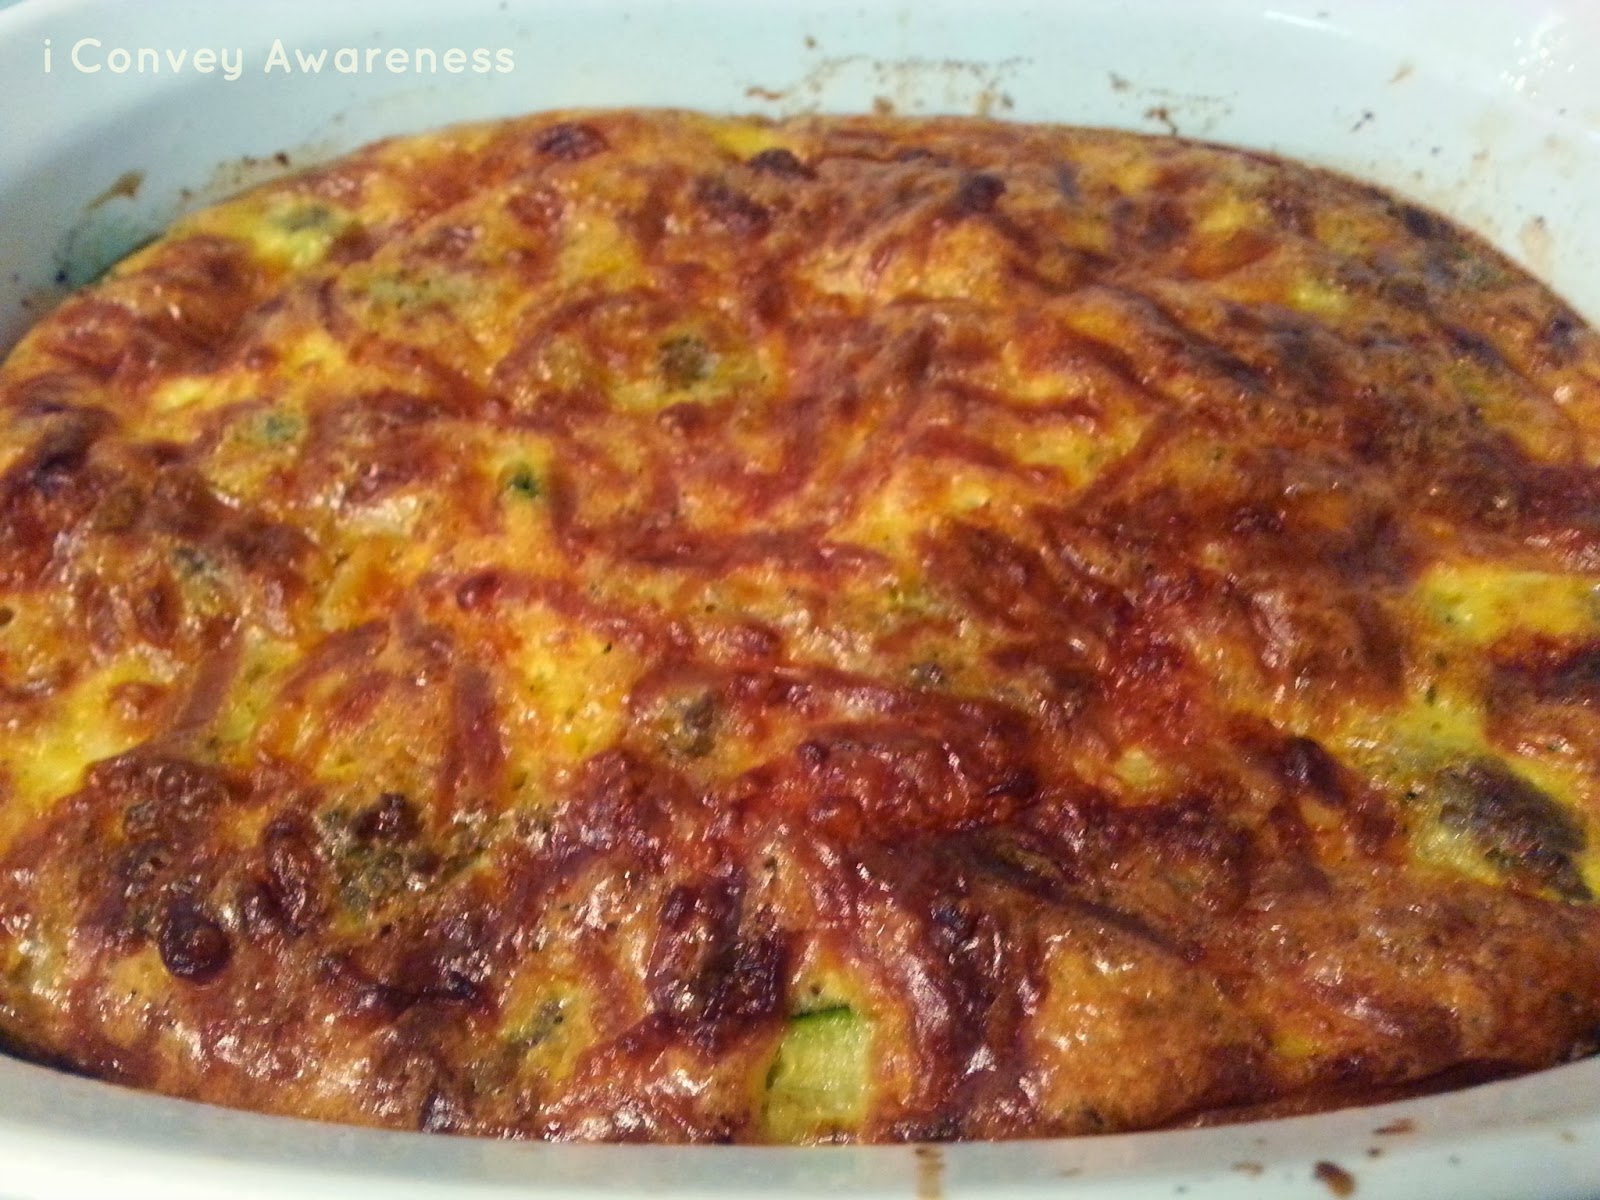 Conveying Awareness with Jessica David: Crustless Veggie Quiche (with ...